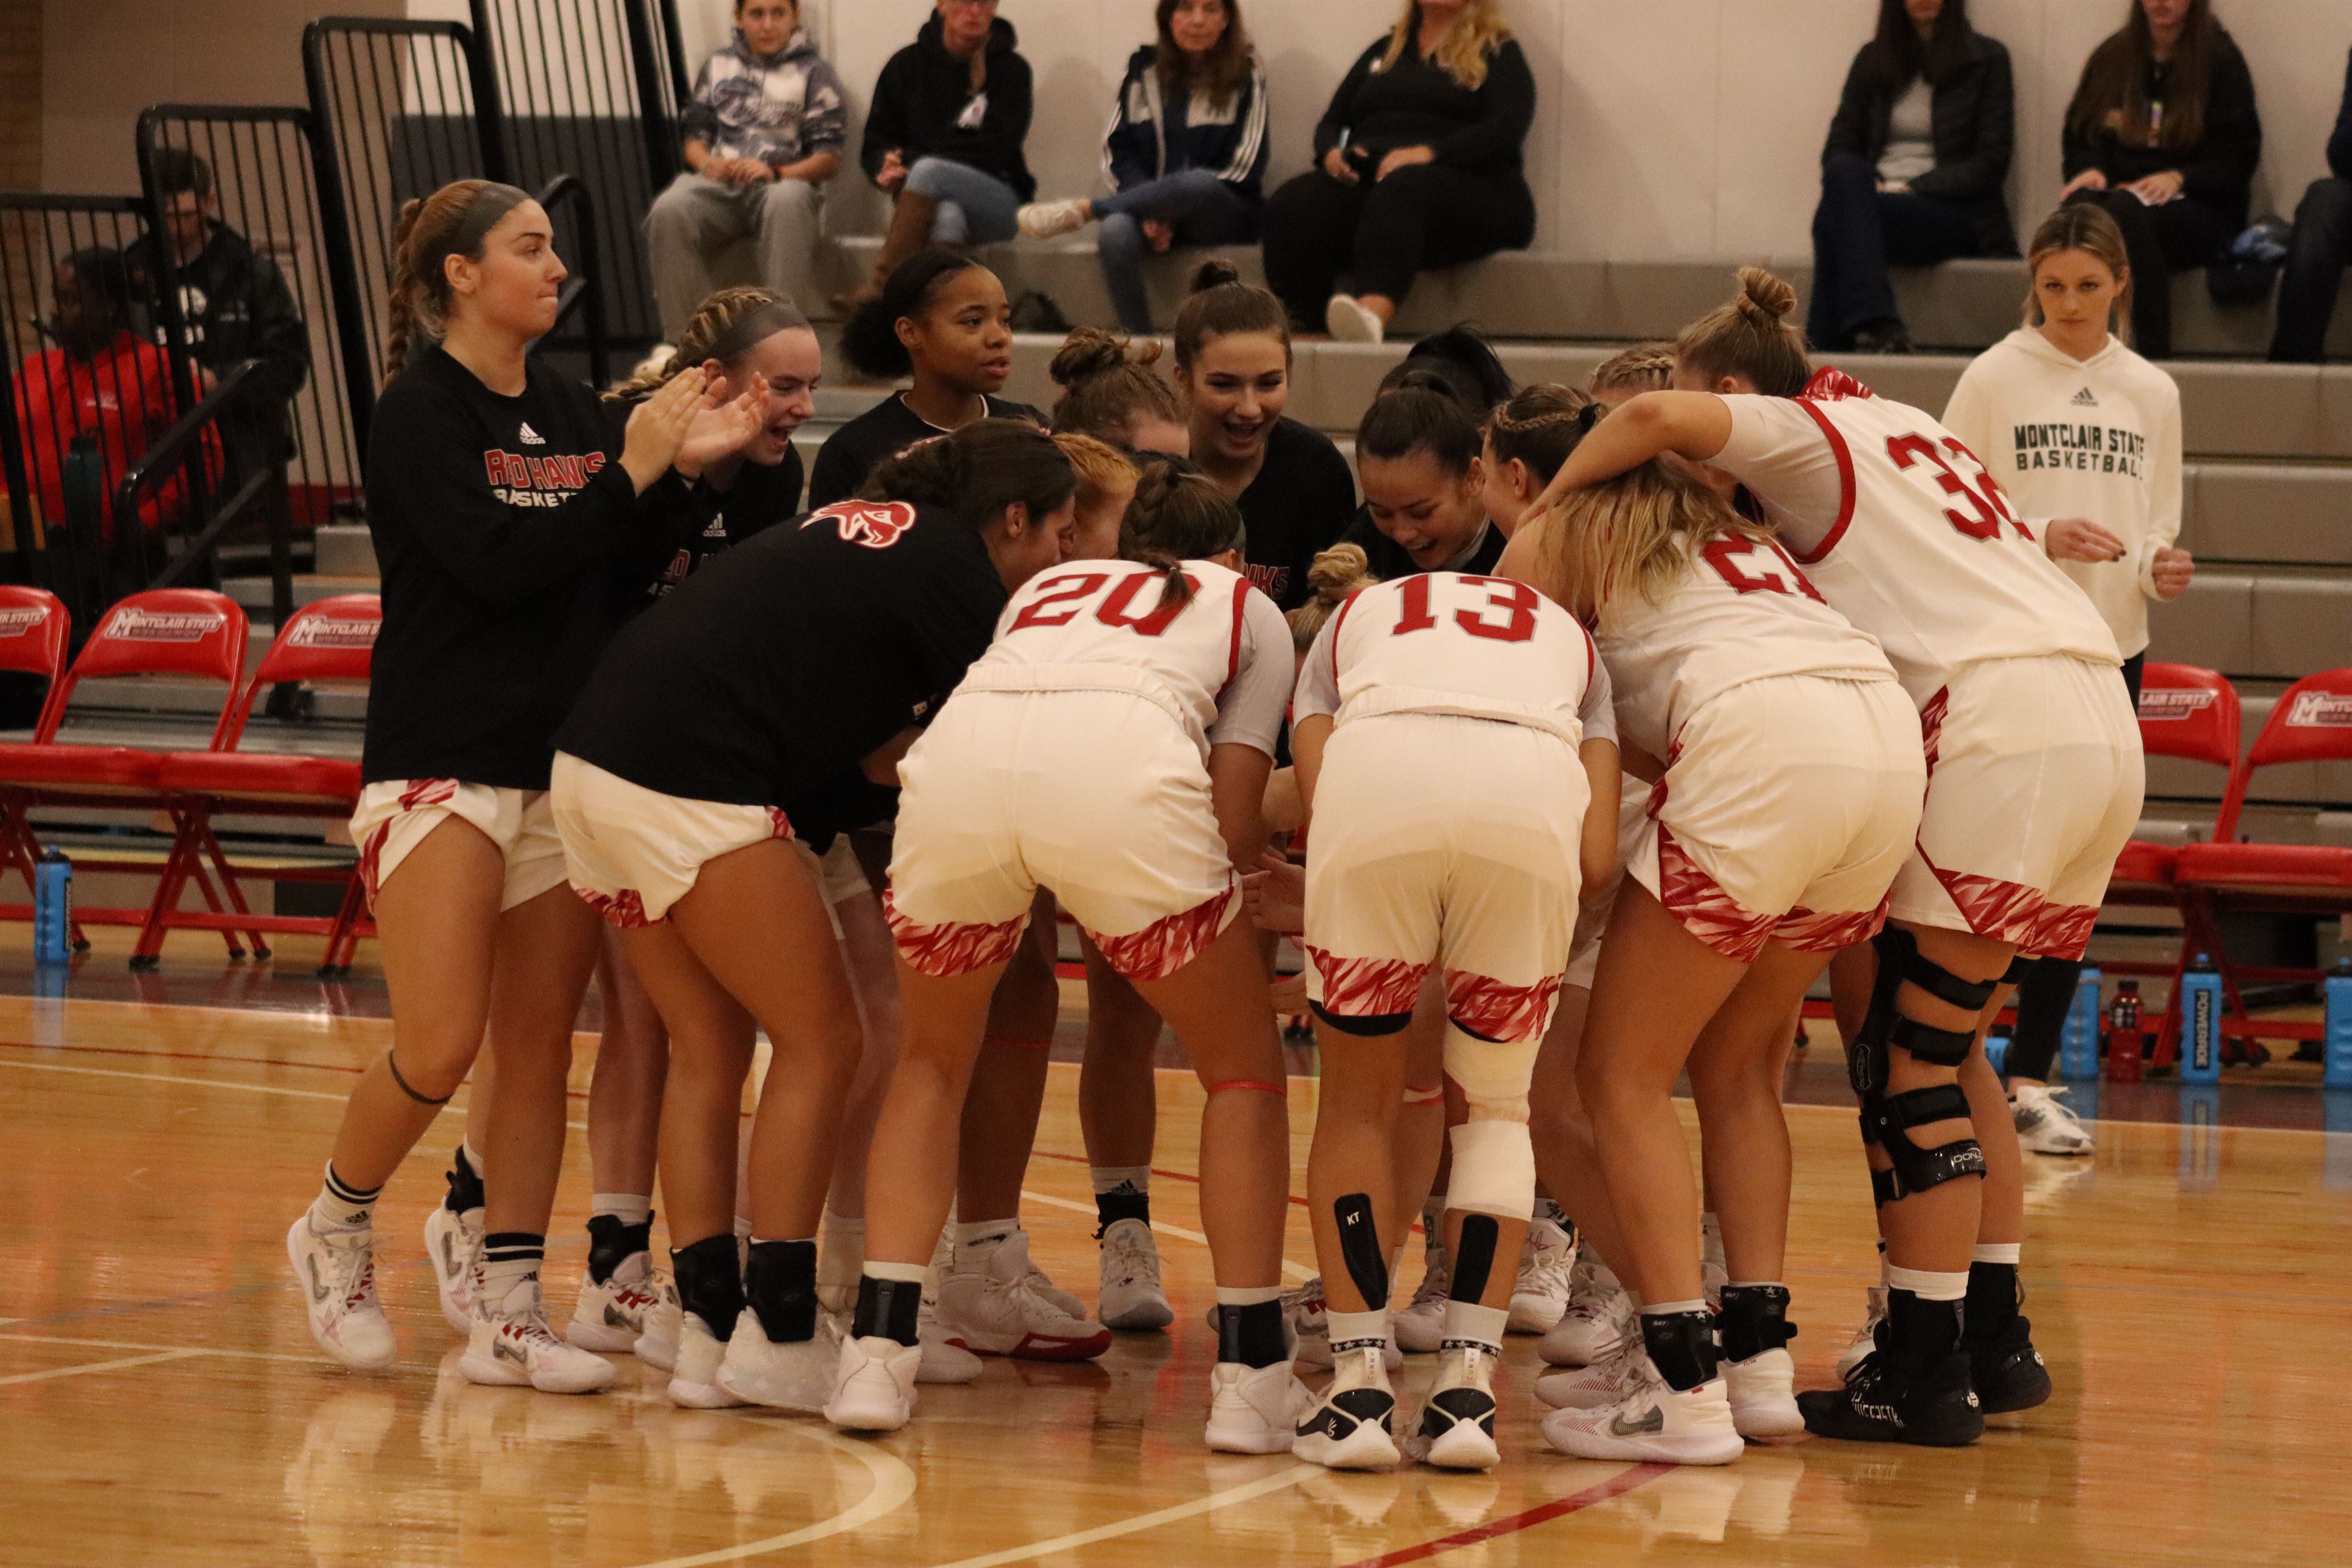 The women's basketball team was huddling up and getting ready for the game. Trevor Giesberg | The Montclarion